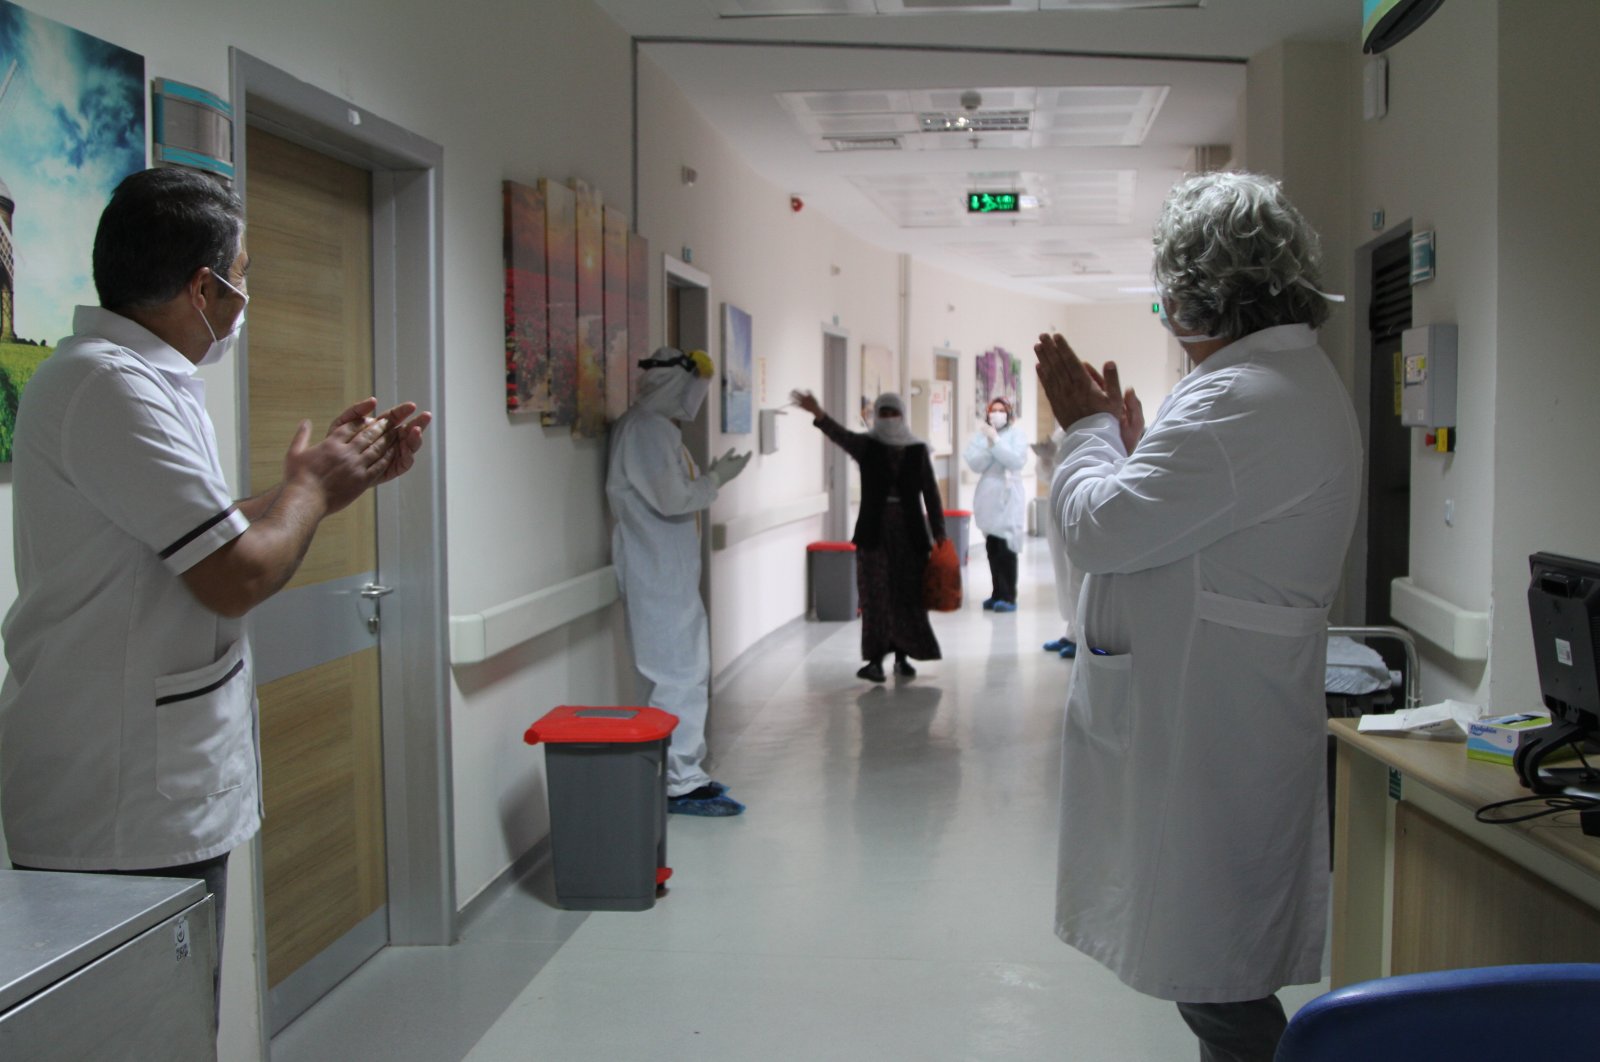 Staff applaud as a COVID-19 patient salutes them while leaving the coronavirus unit at a hospital in the Özalp district of Turkey's eastern Van province, Nov. 9, 2020. (AA Photo)